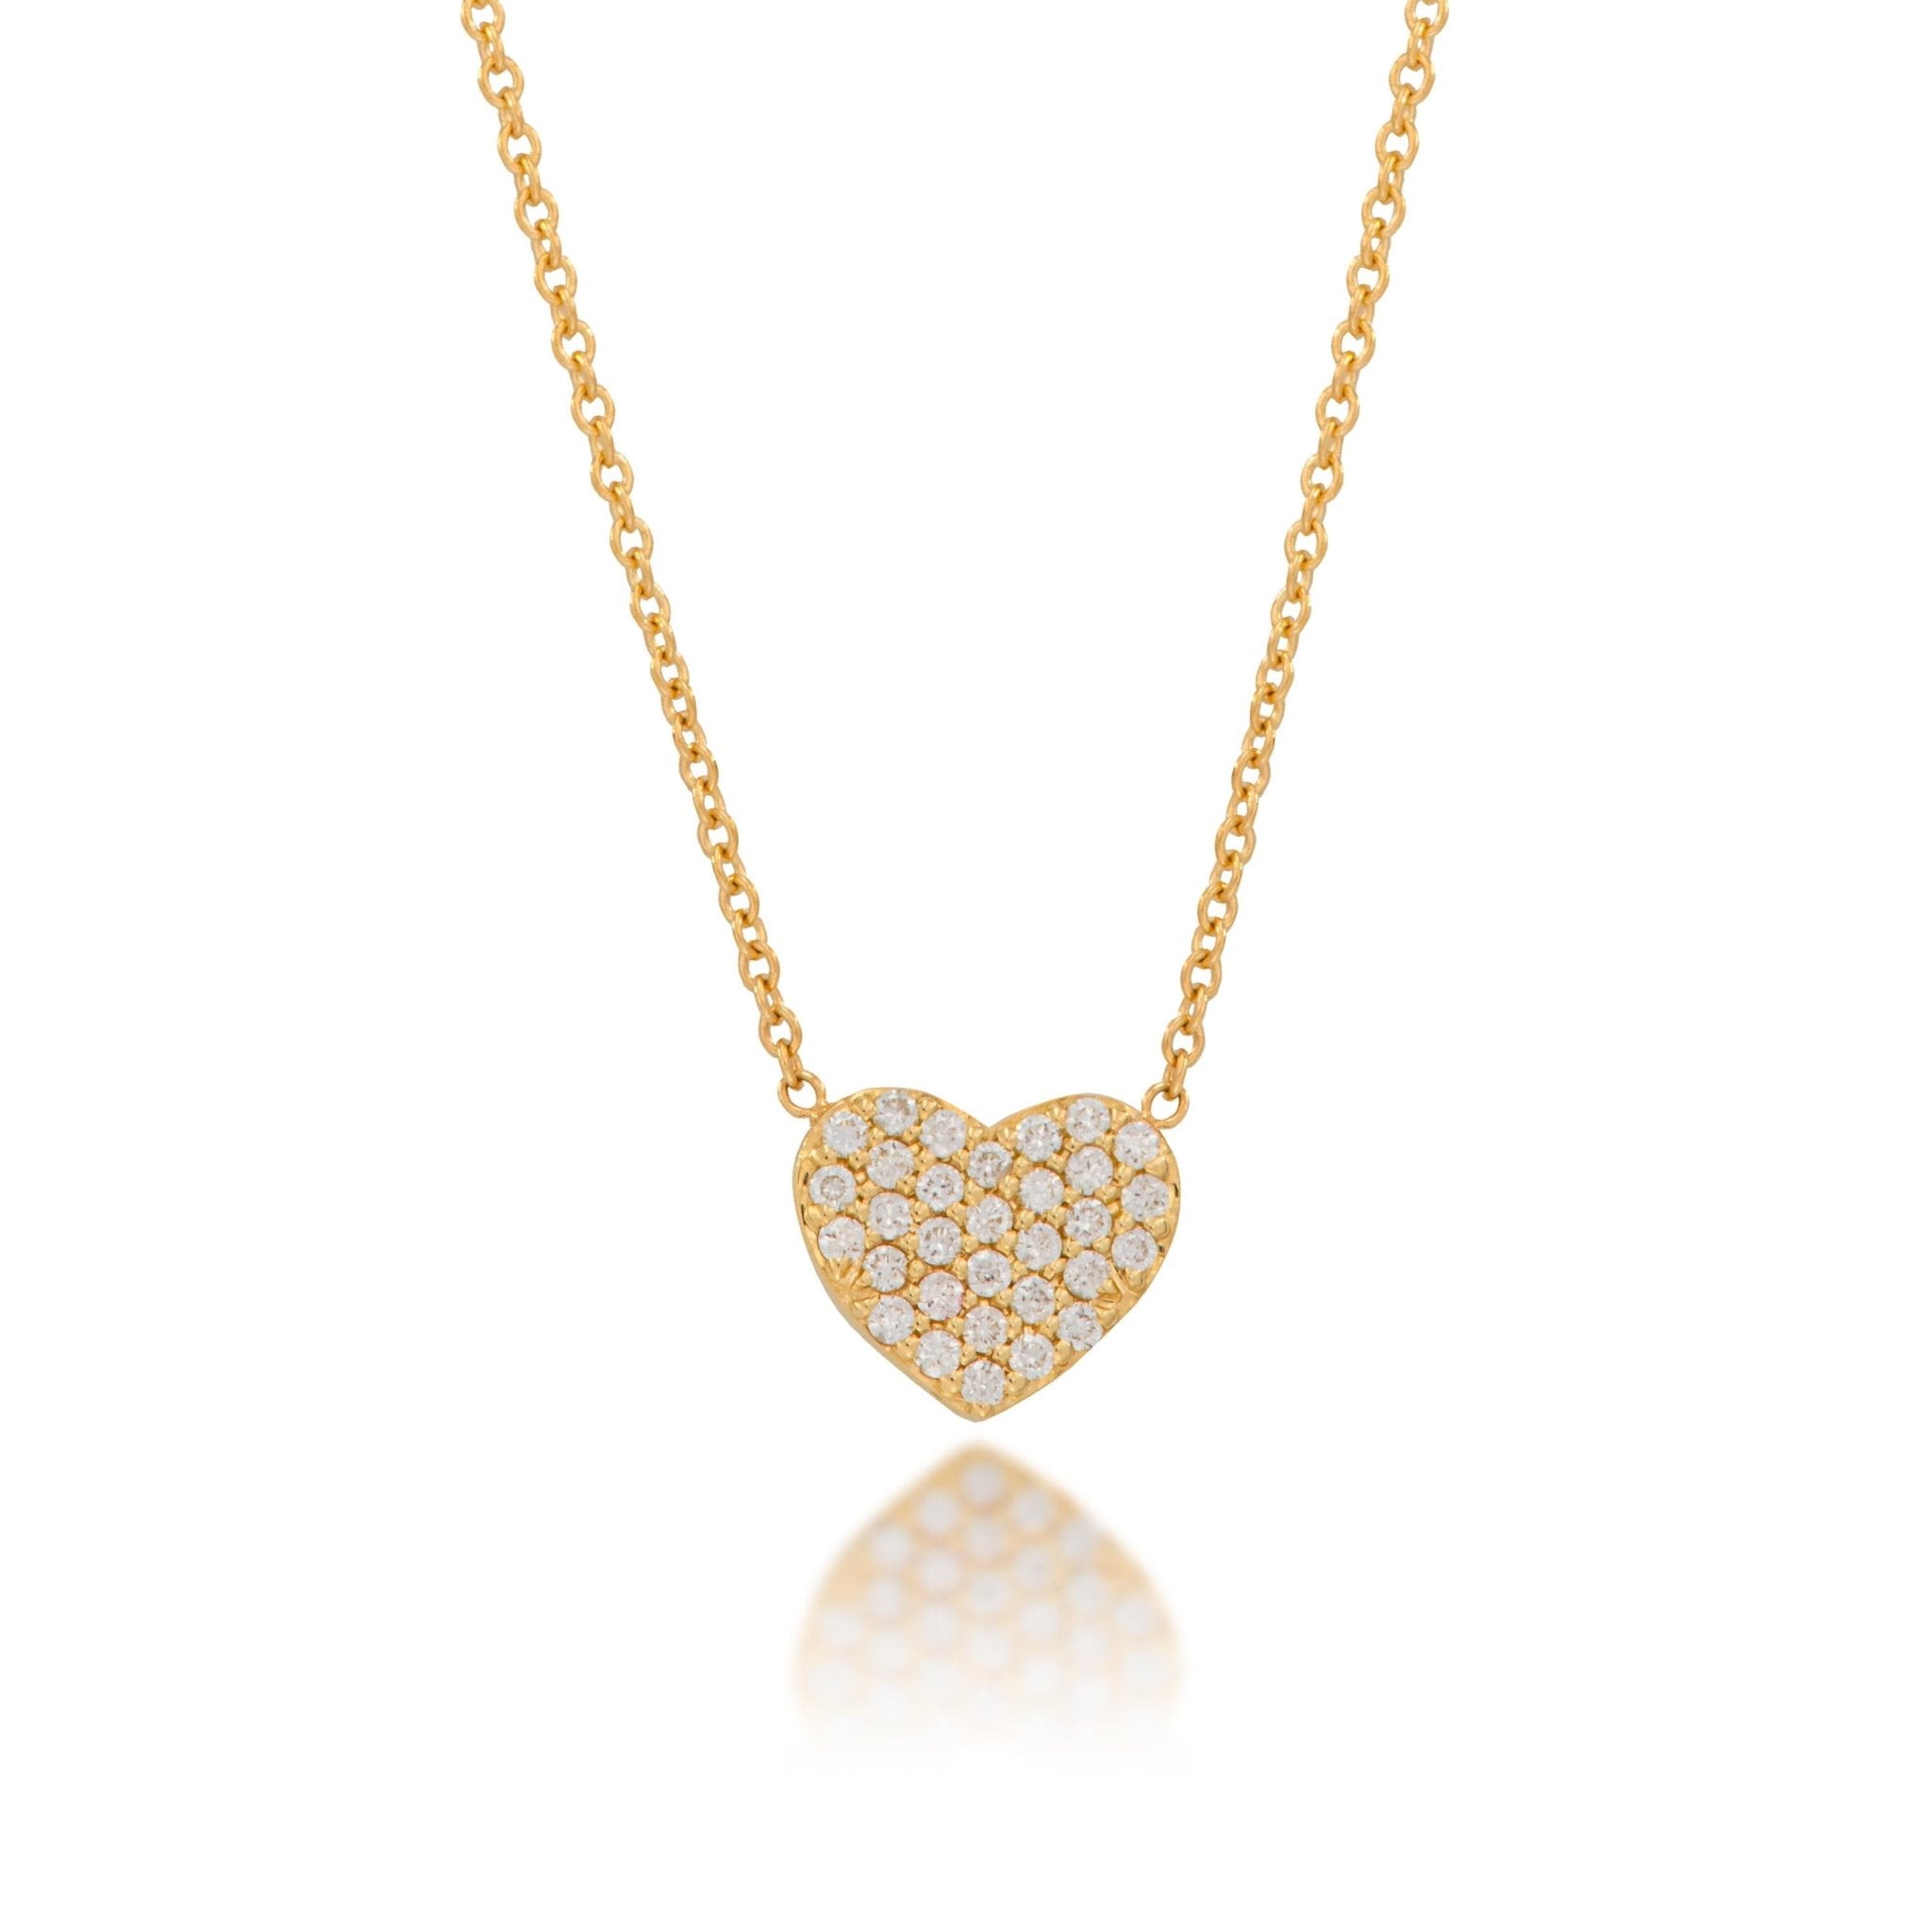 Pave Heart Necklace - Alexis Jae Jewelry